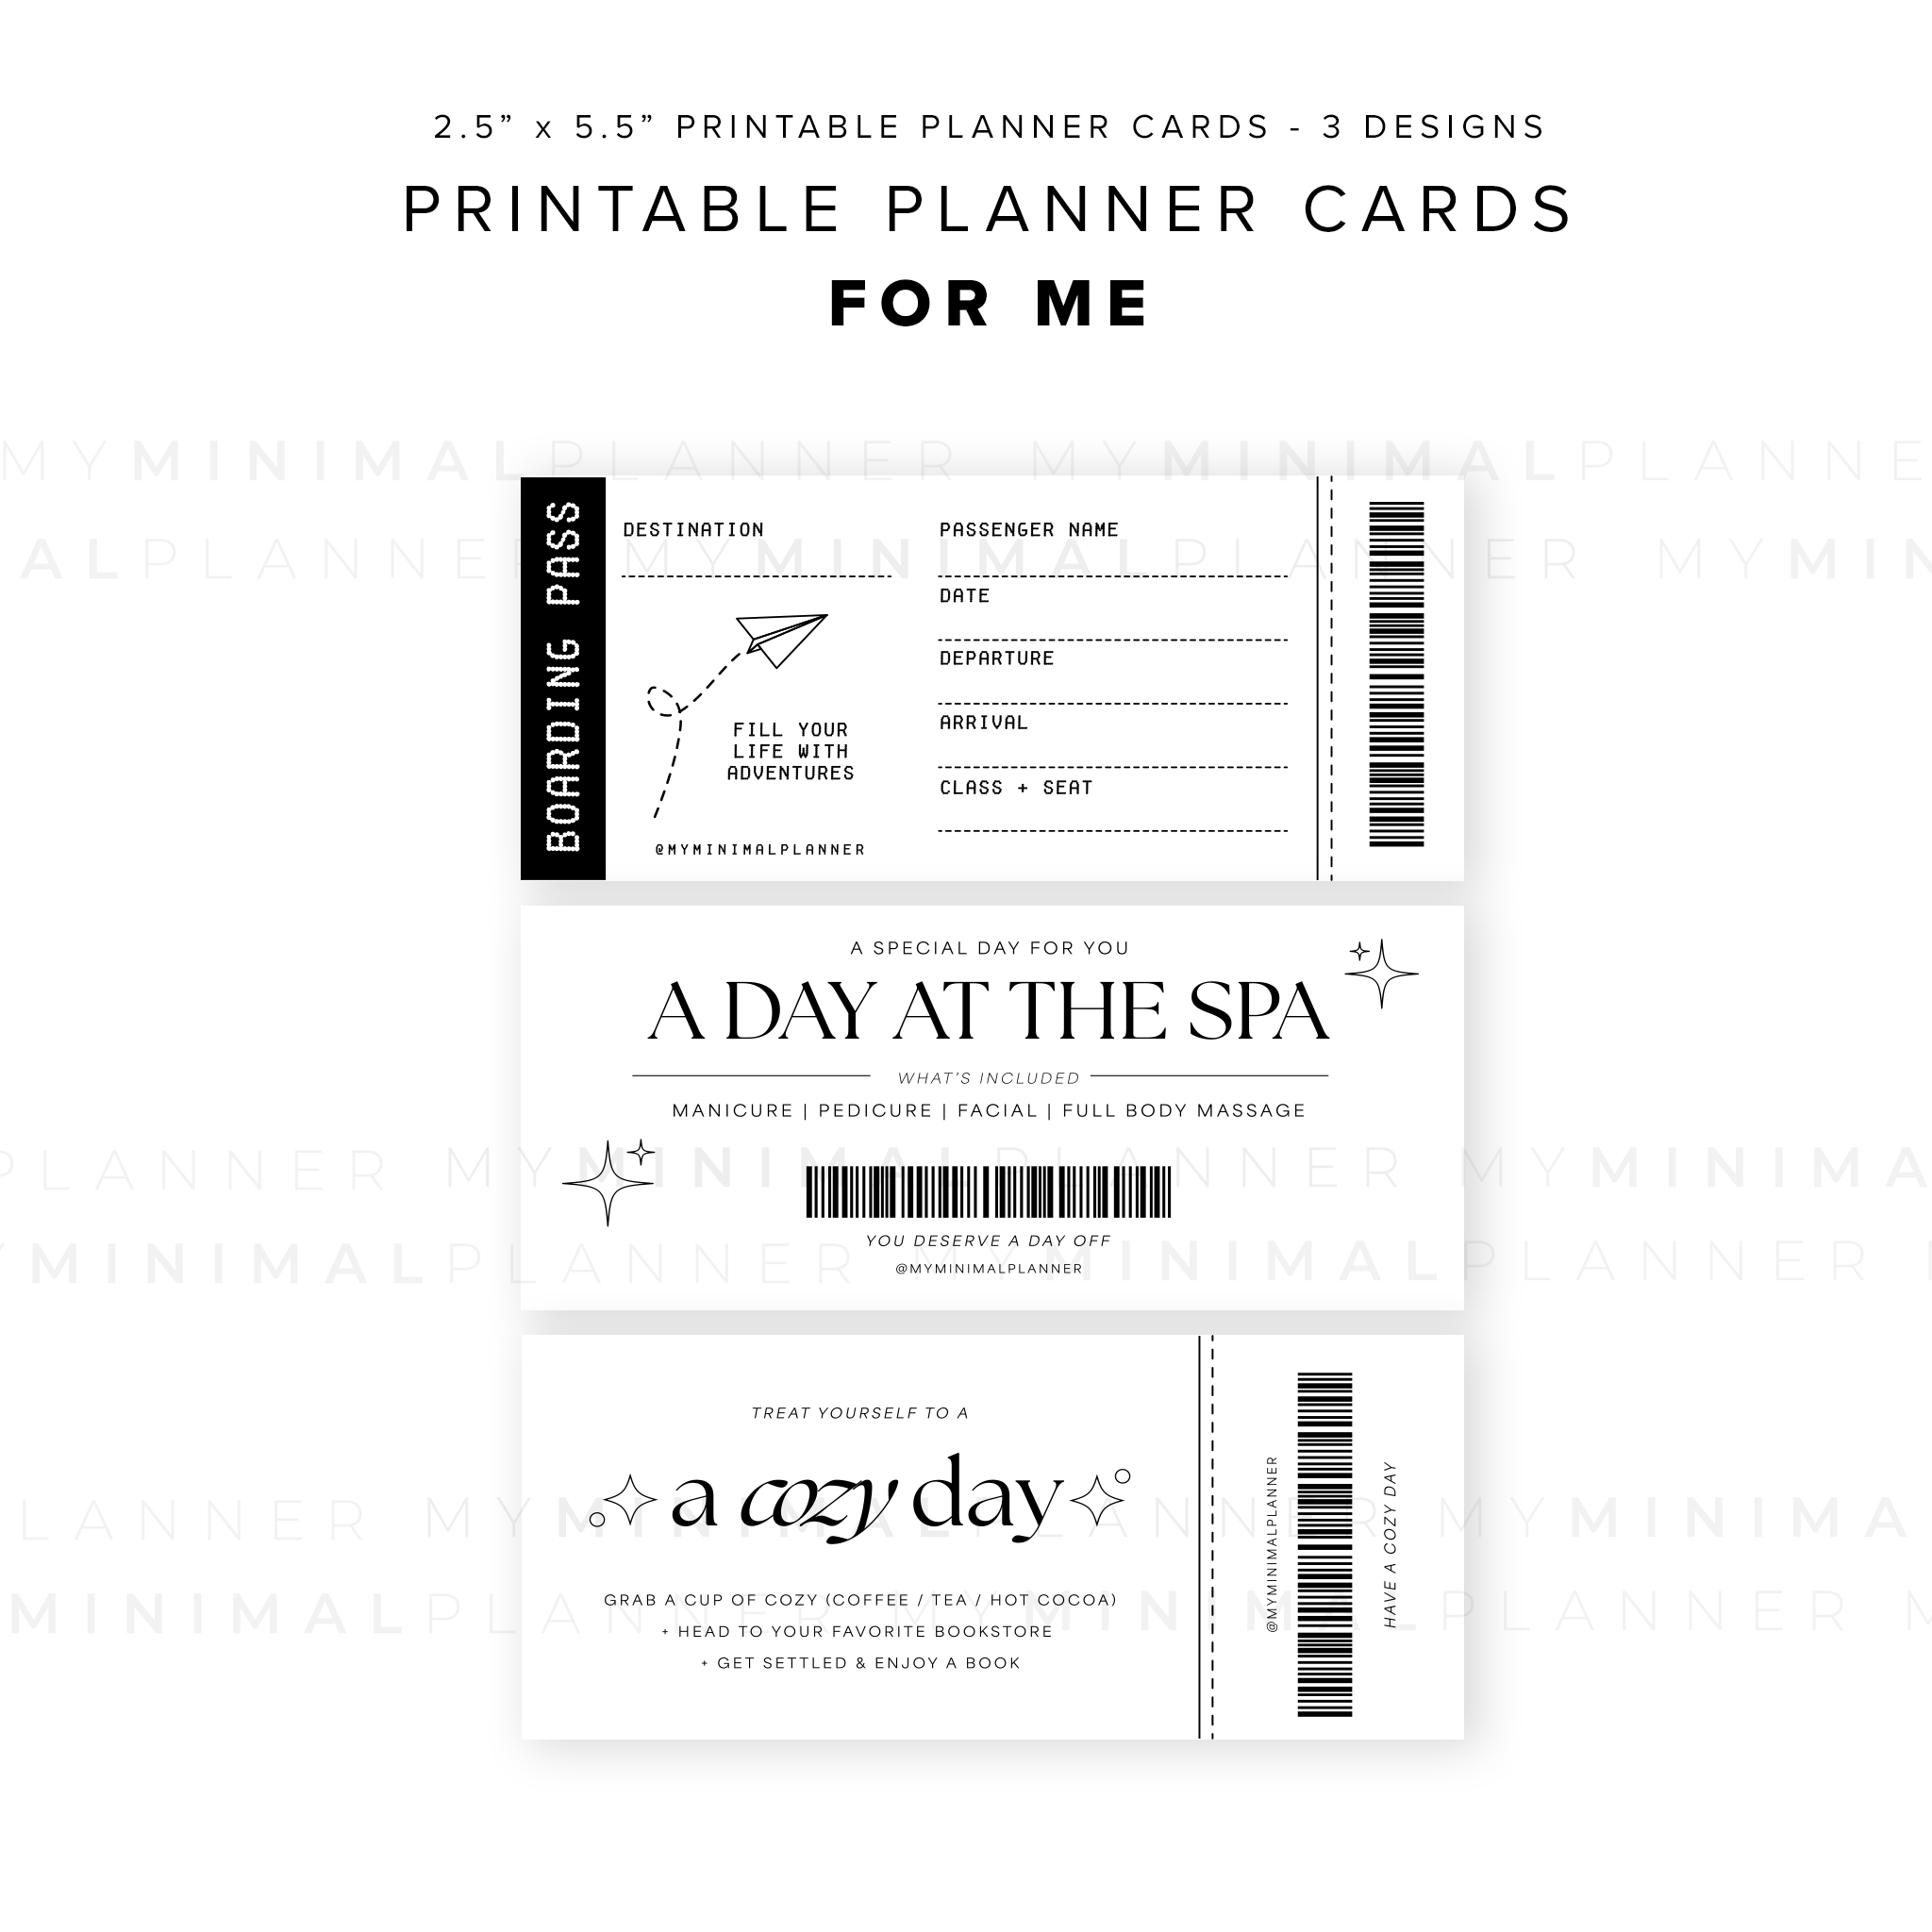 PPC27 - For ME - Printable Planner Cards